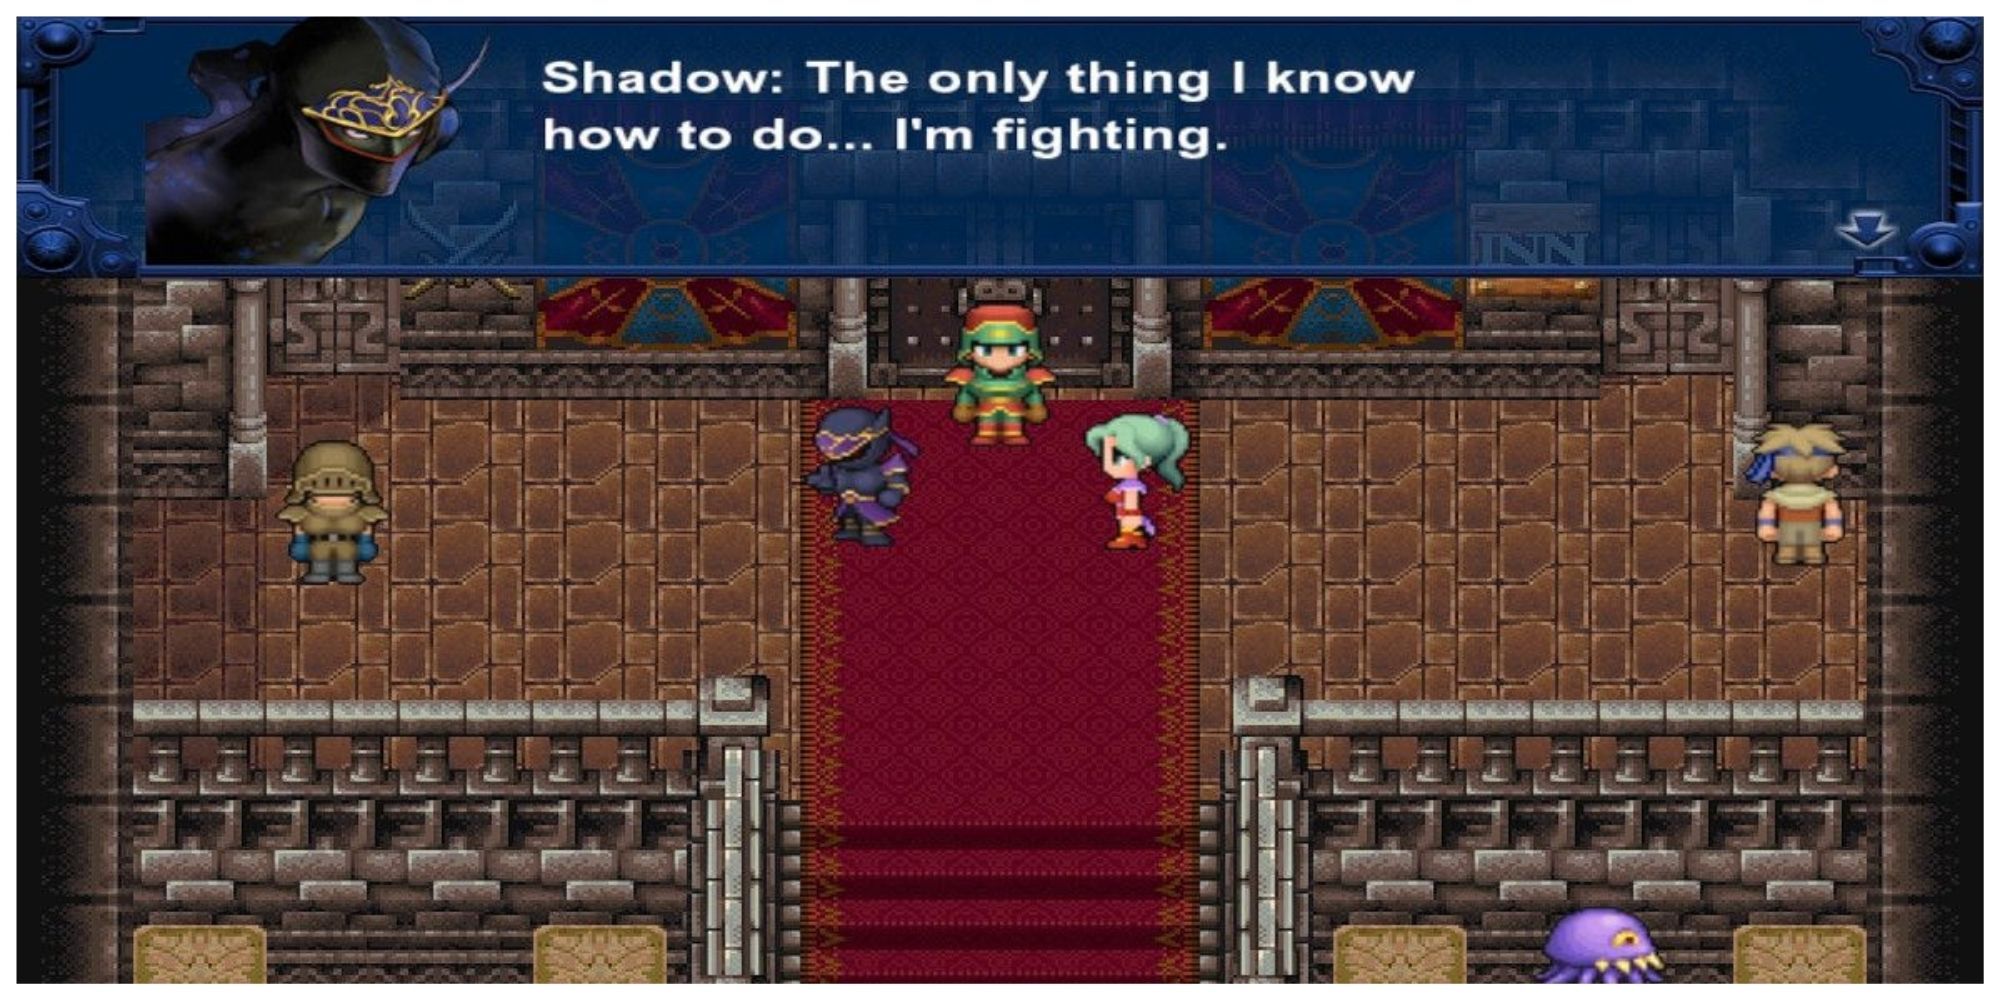 Shadow From Final Fantasy 6 Talking with Party Memebers